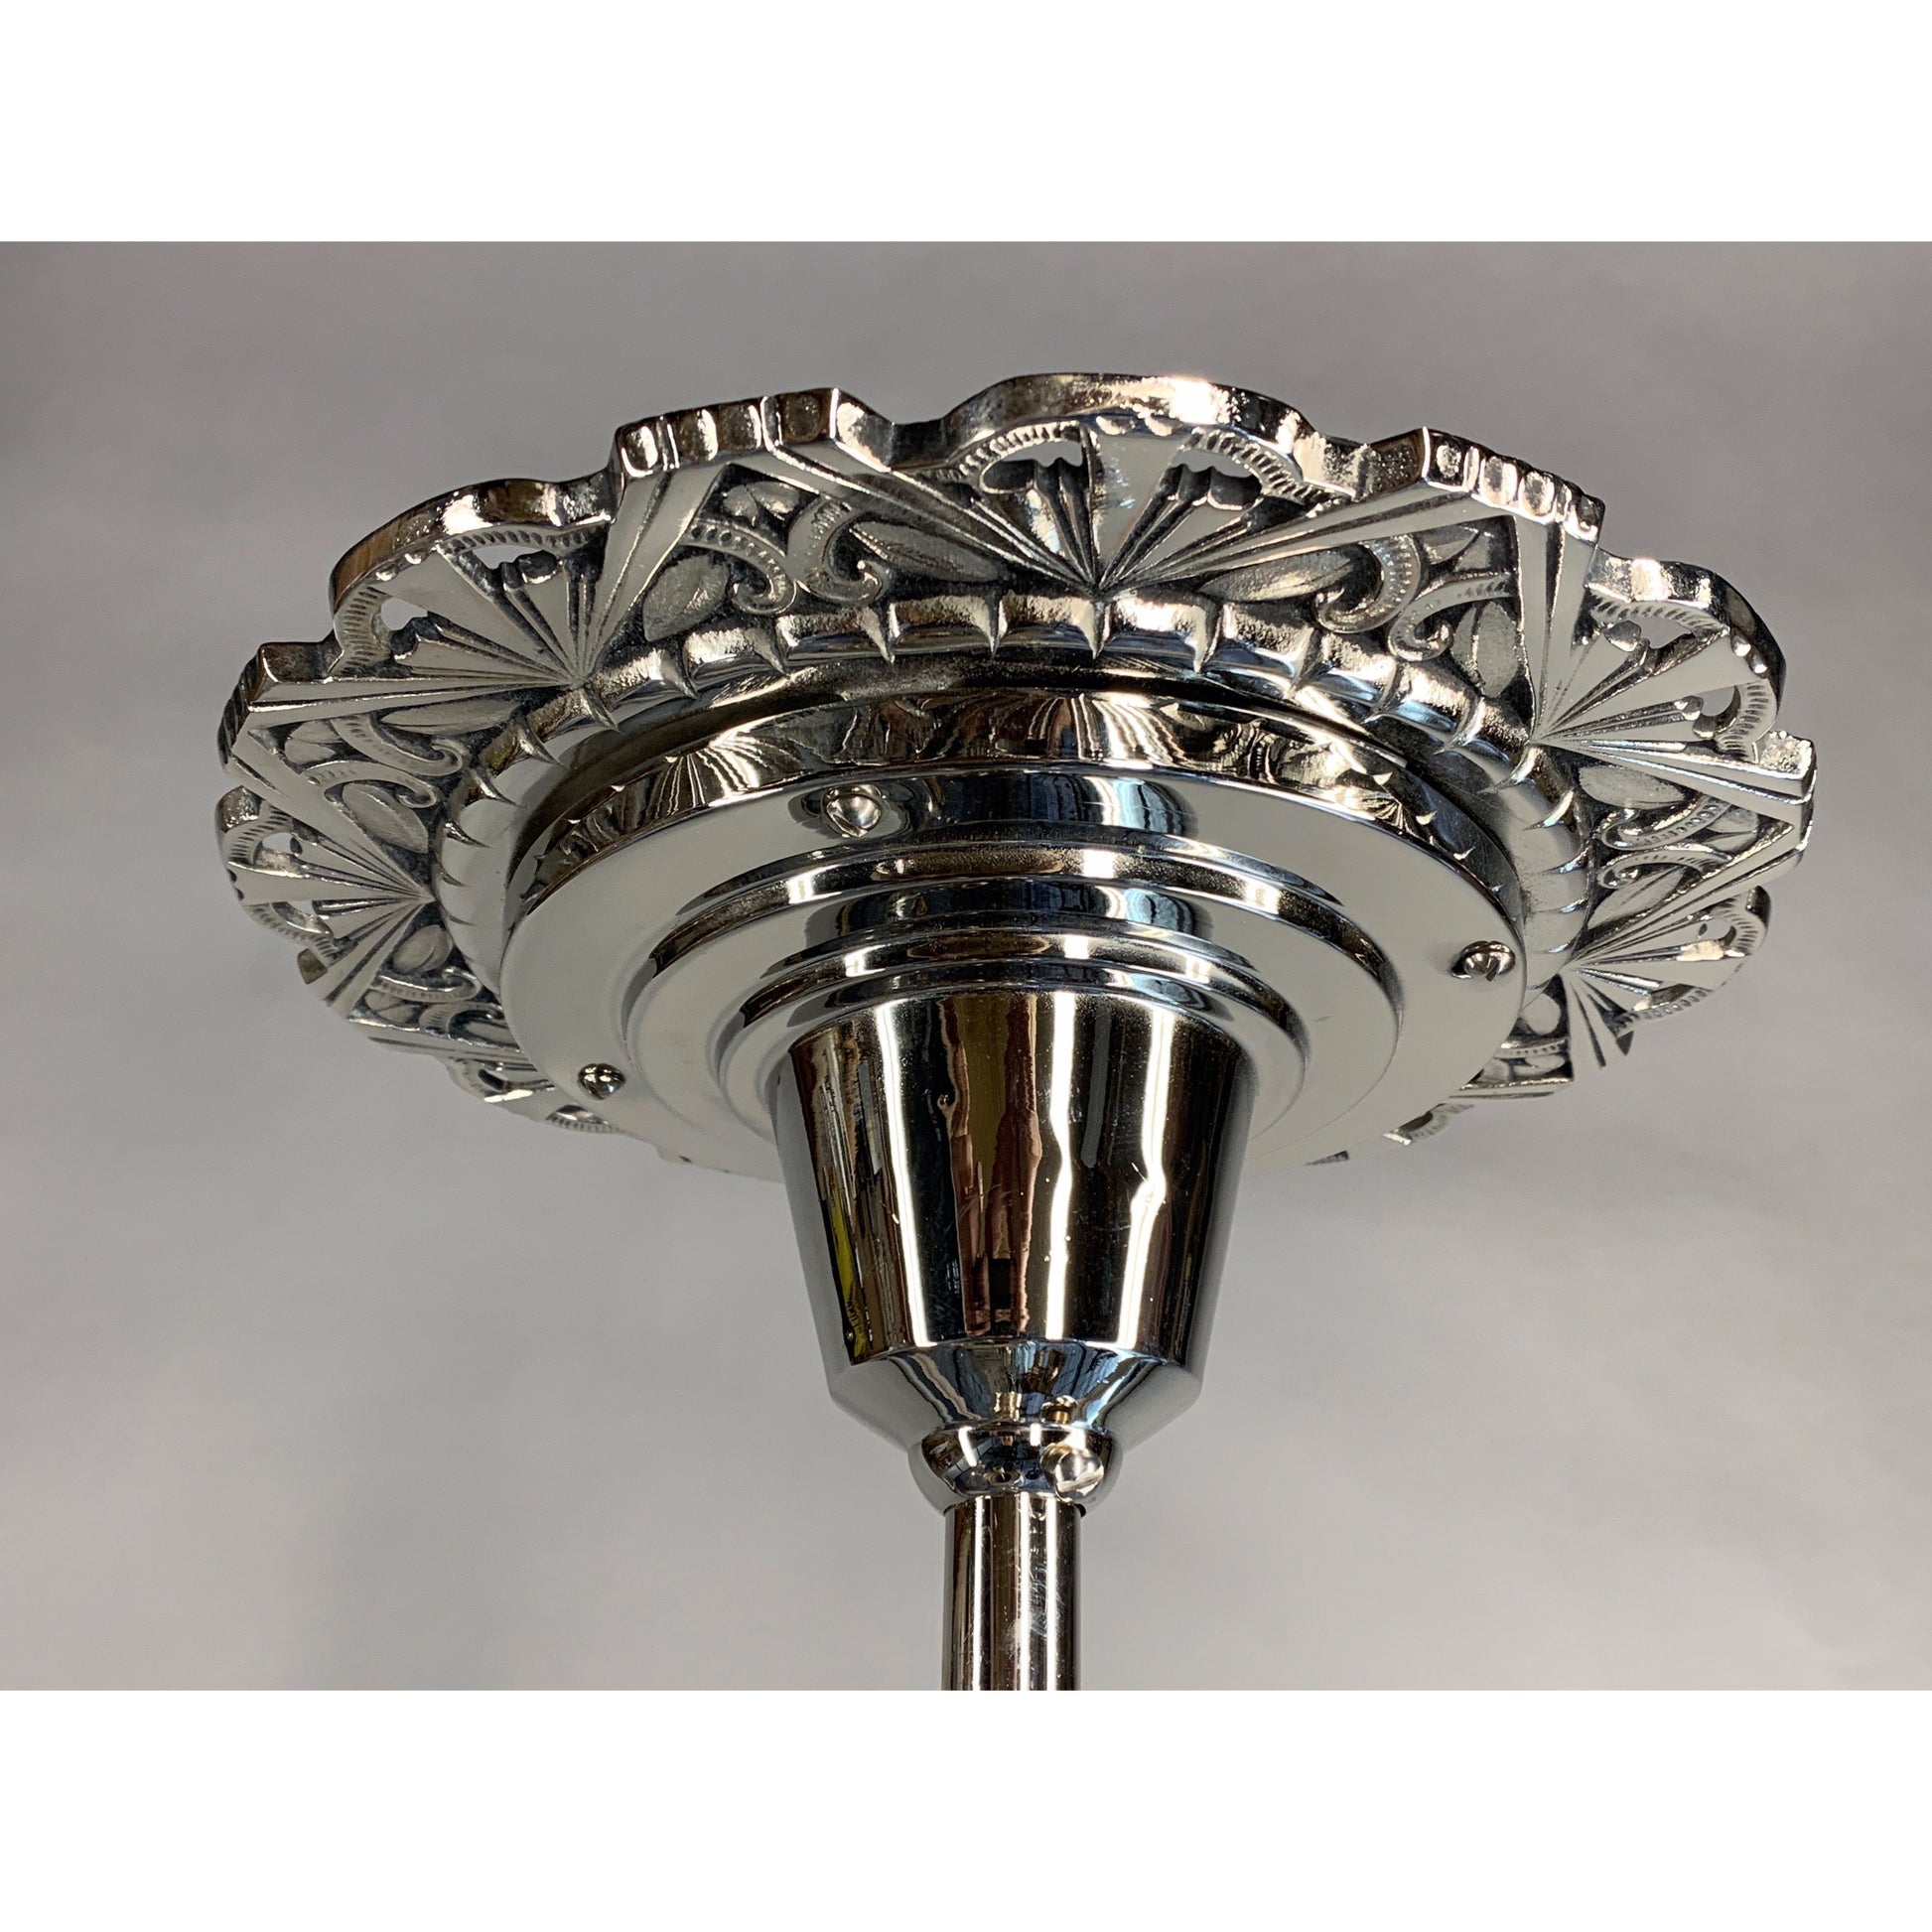 Commercial Art Deco Pendant with Skyscraper Shade, Nickel Plated #2030 - Filament Vintage Lighting